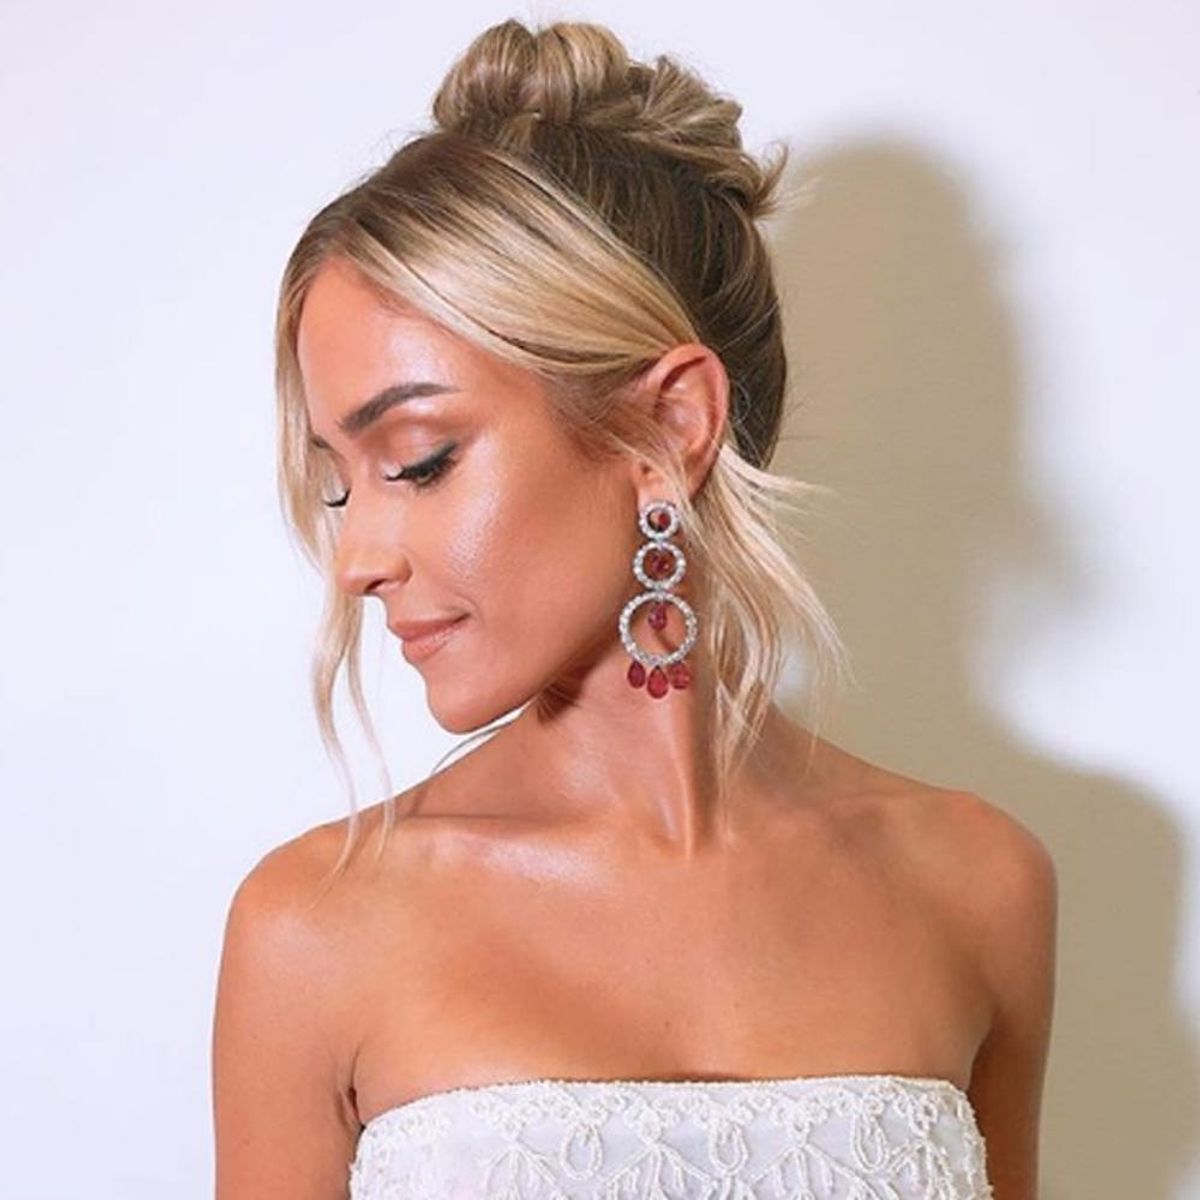 11 Easy Ways to Style Short Hair in 10 Minutes or Less